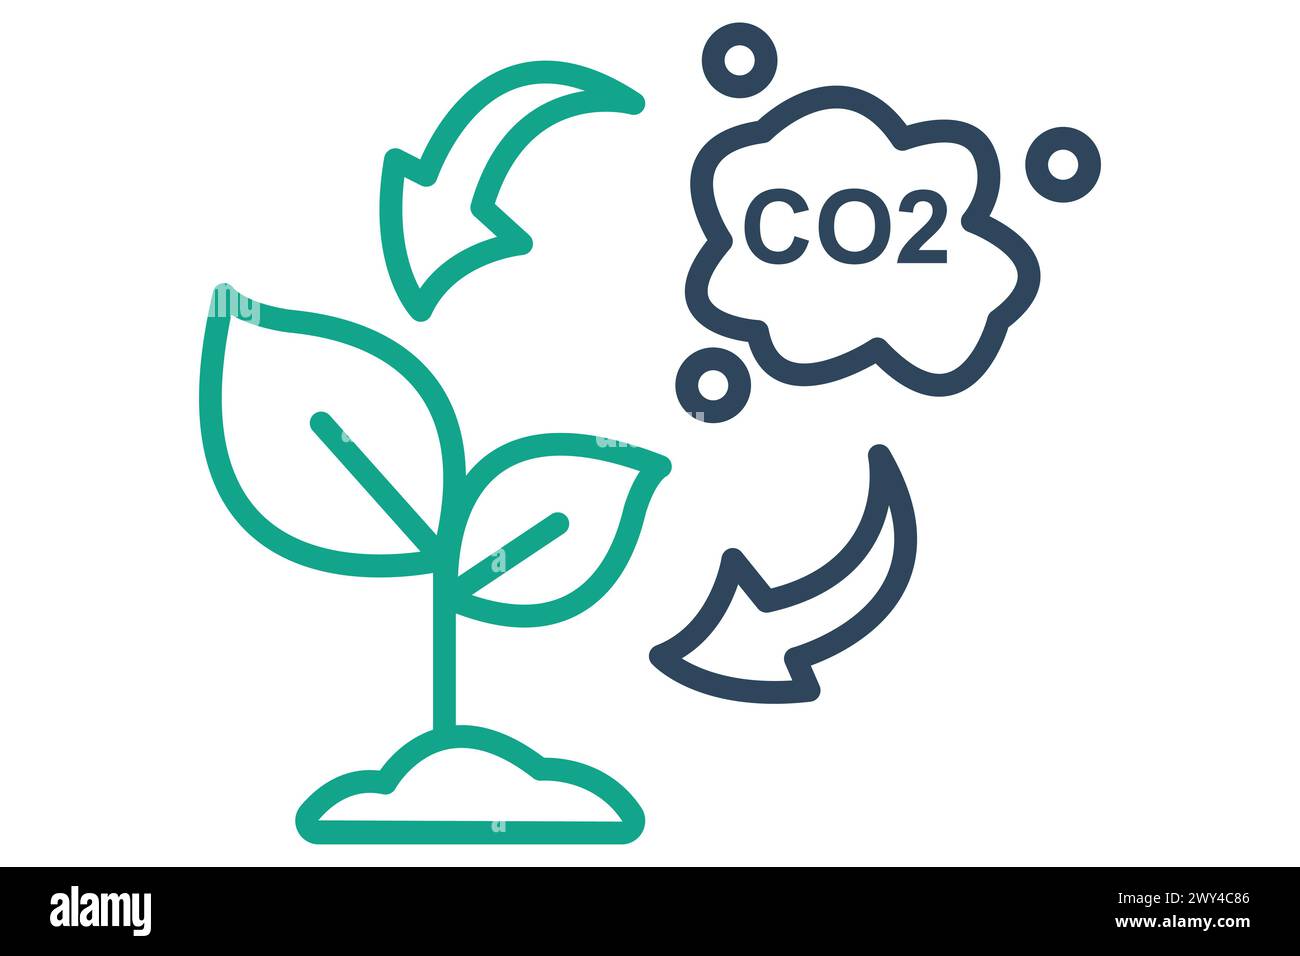 CO2 icon. plant with CO2. icon related to ESG. line icon style. nature element illustration Stock Vector